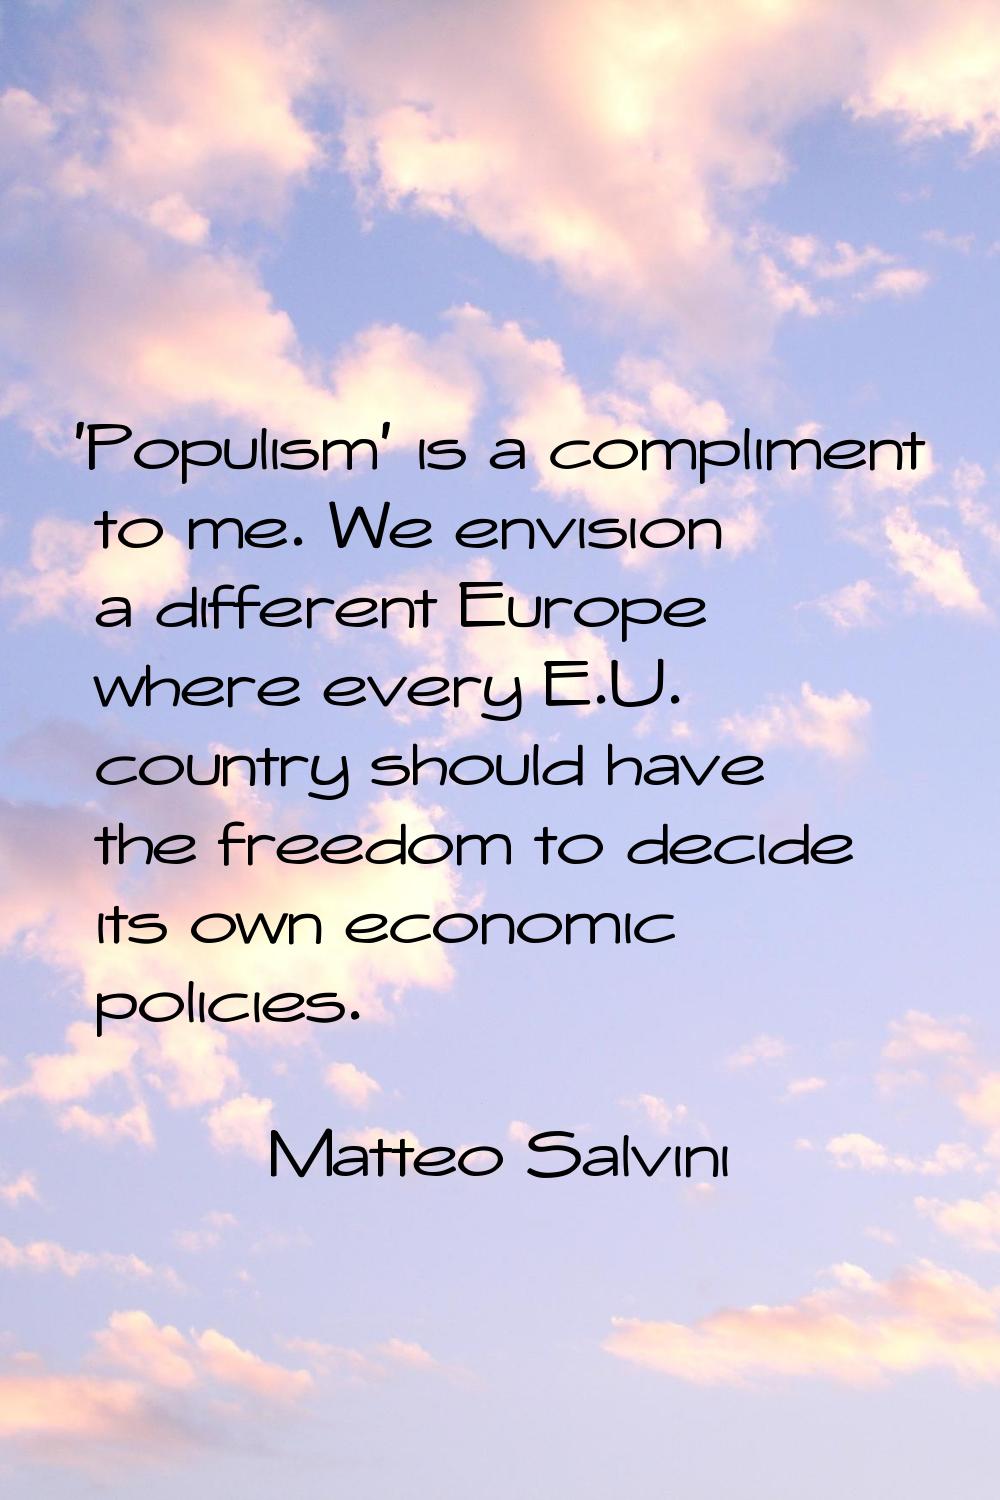 'Populism' is a compliment to me. We envision a different Europe where every E.U. country should ha